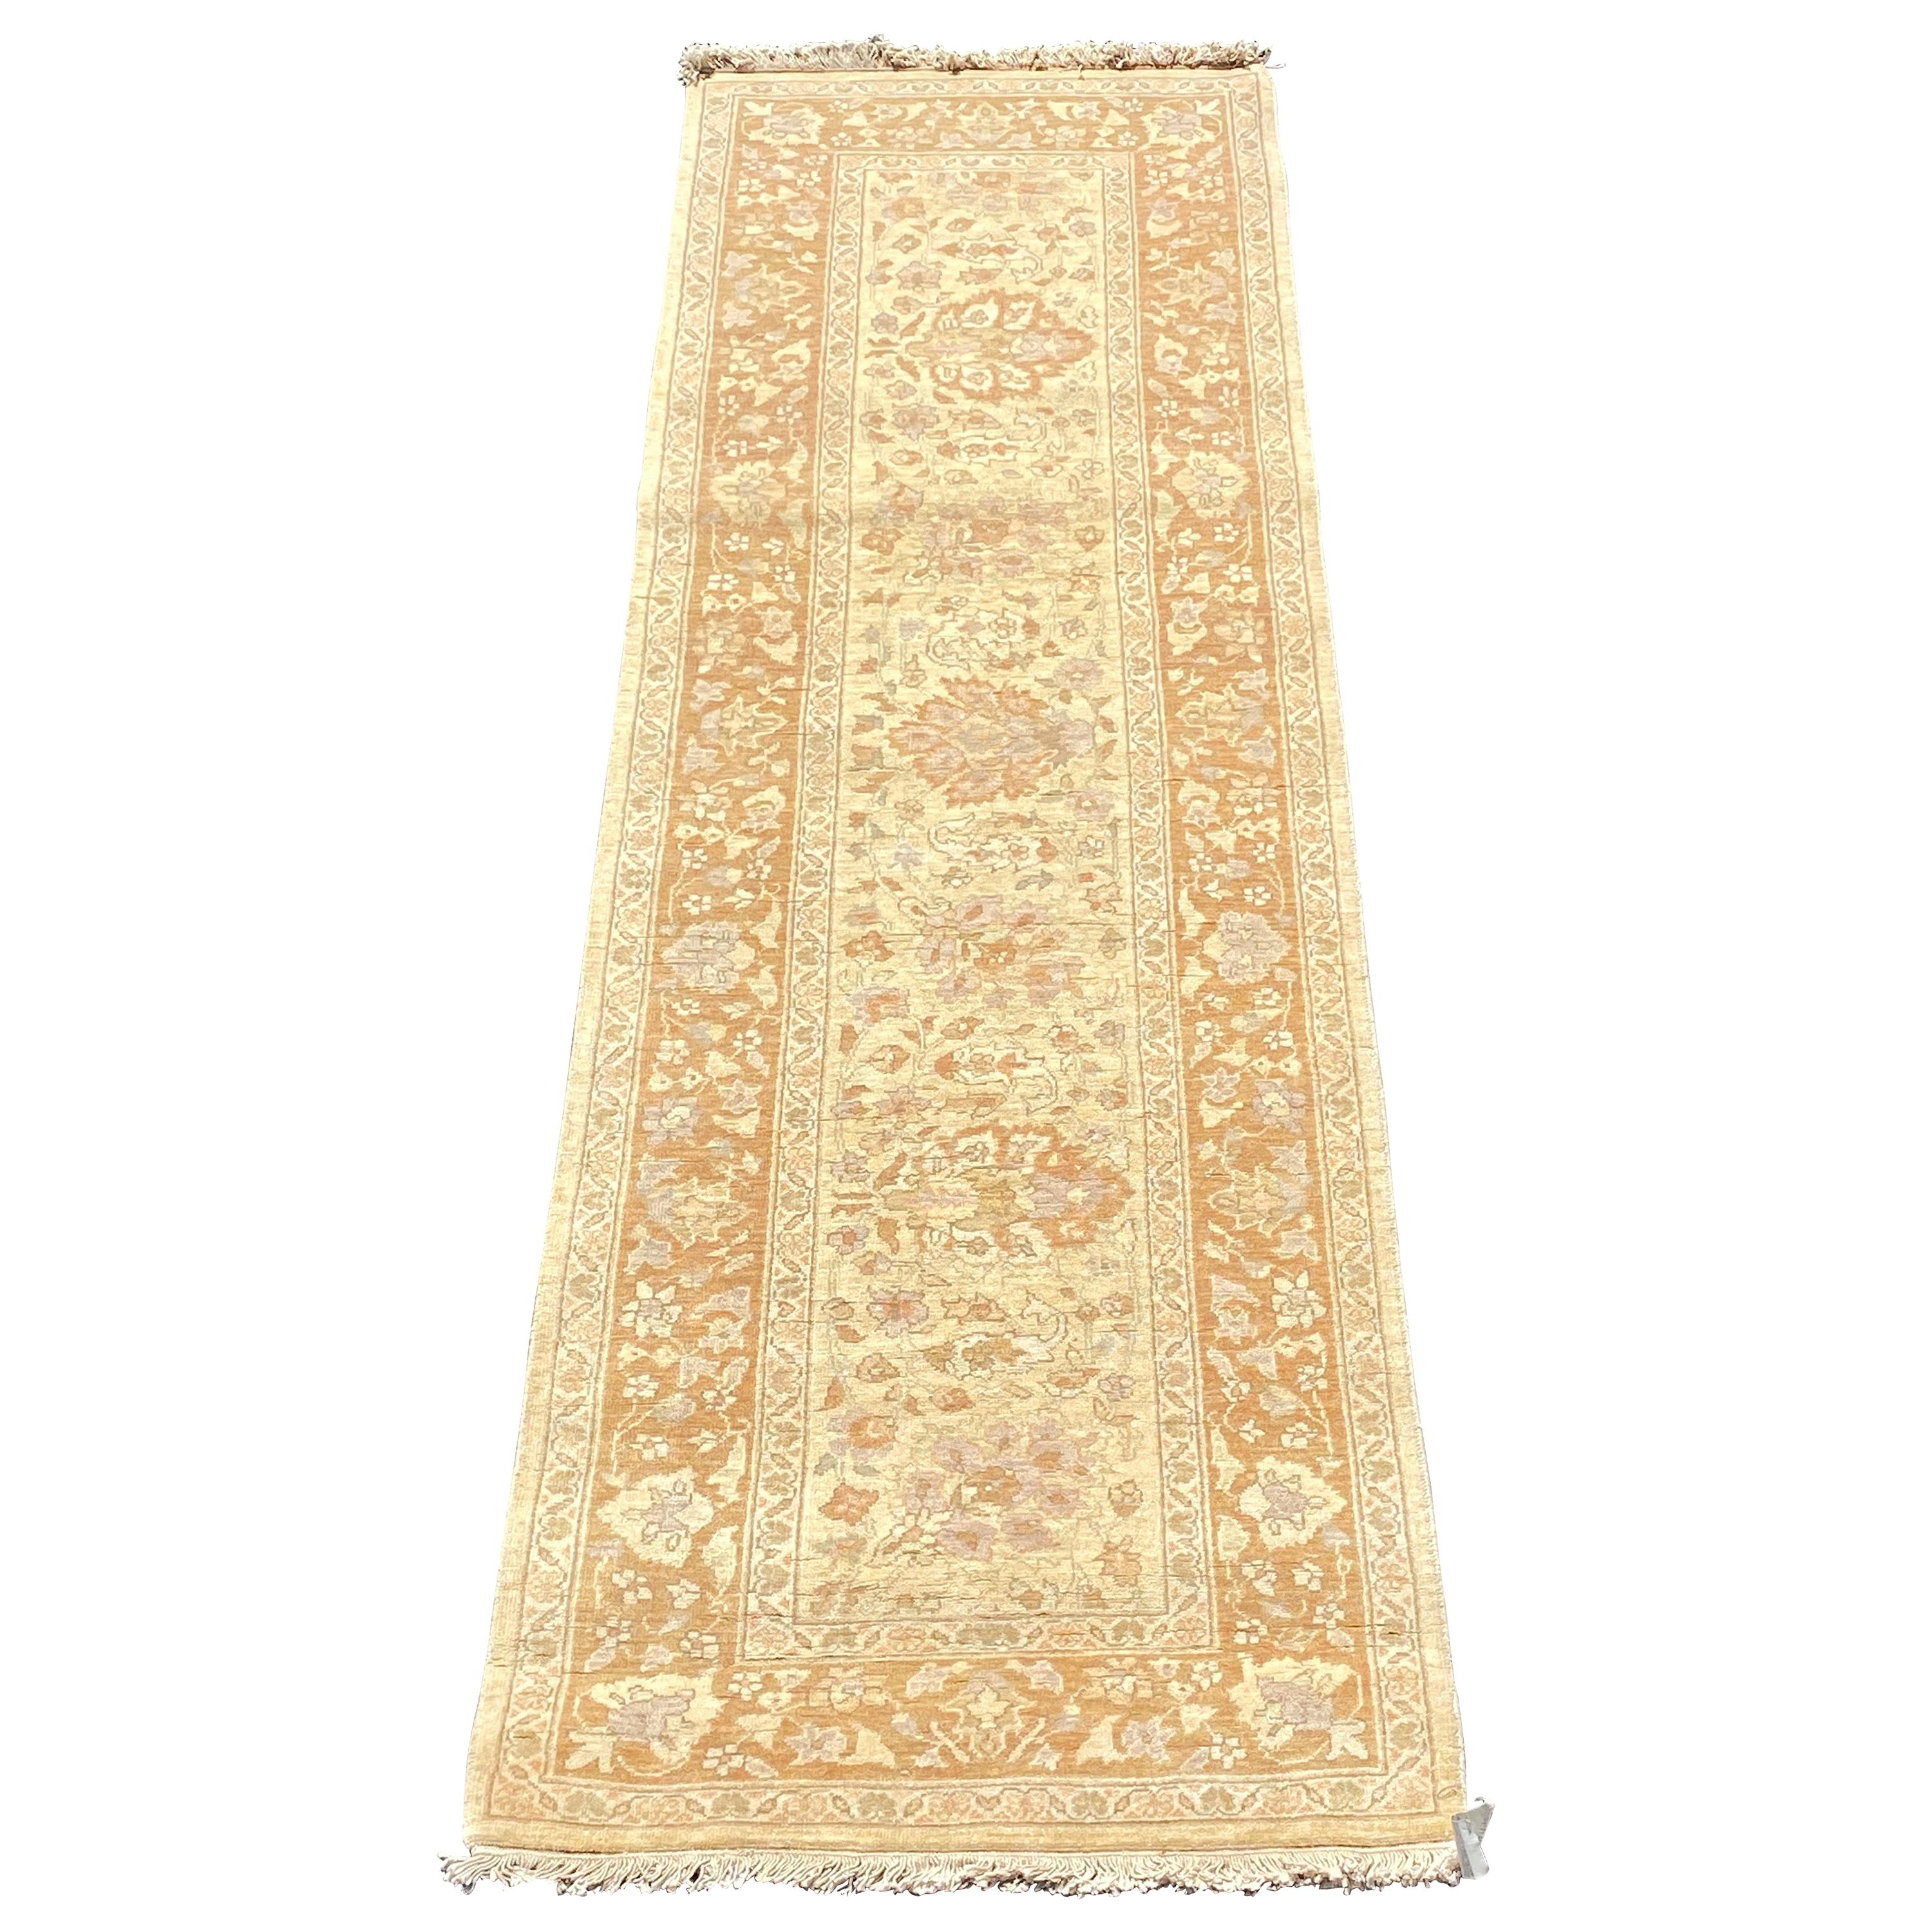 Late 20th Century Beige Maize Floral Persian Style Narrow Runner Rug